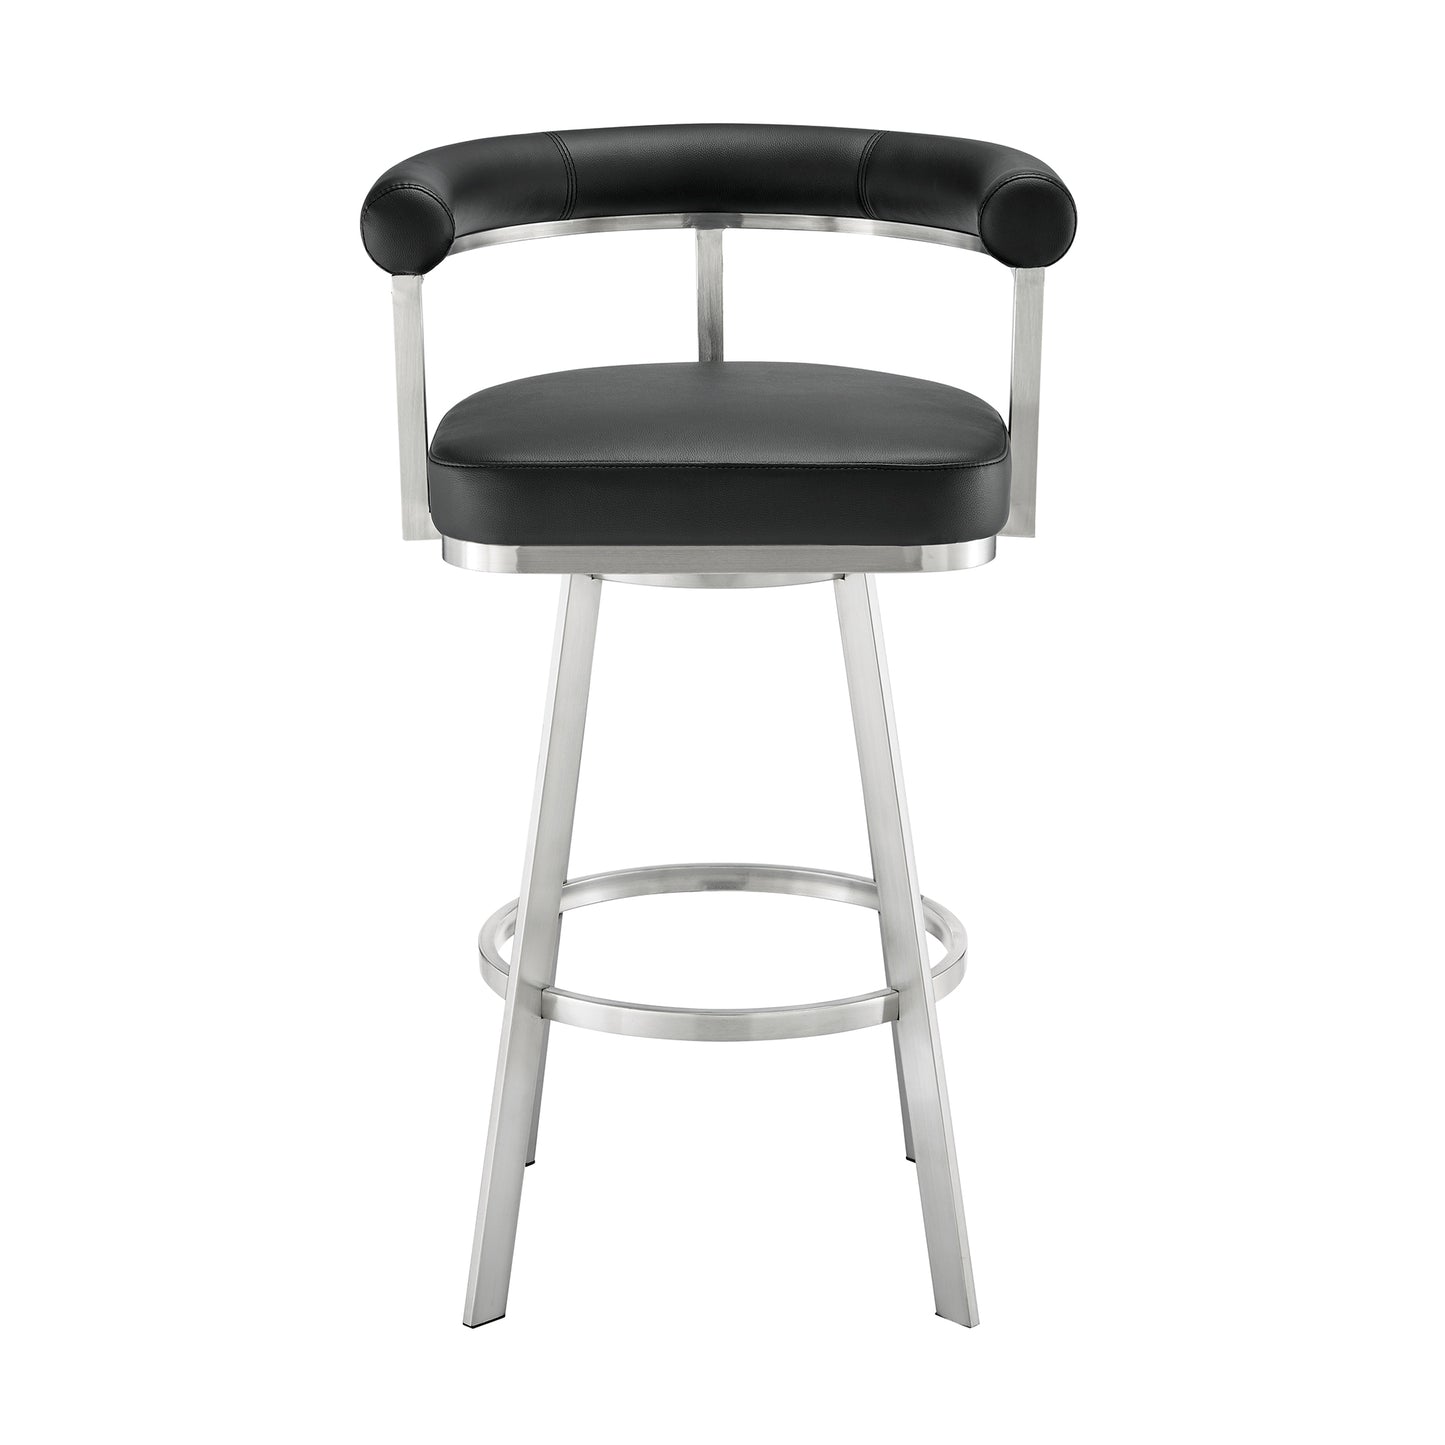 Magnolia 30" Swivel Bar Stool in Brushed Stainless Steel with Black Faux Leather